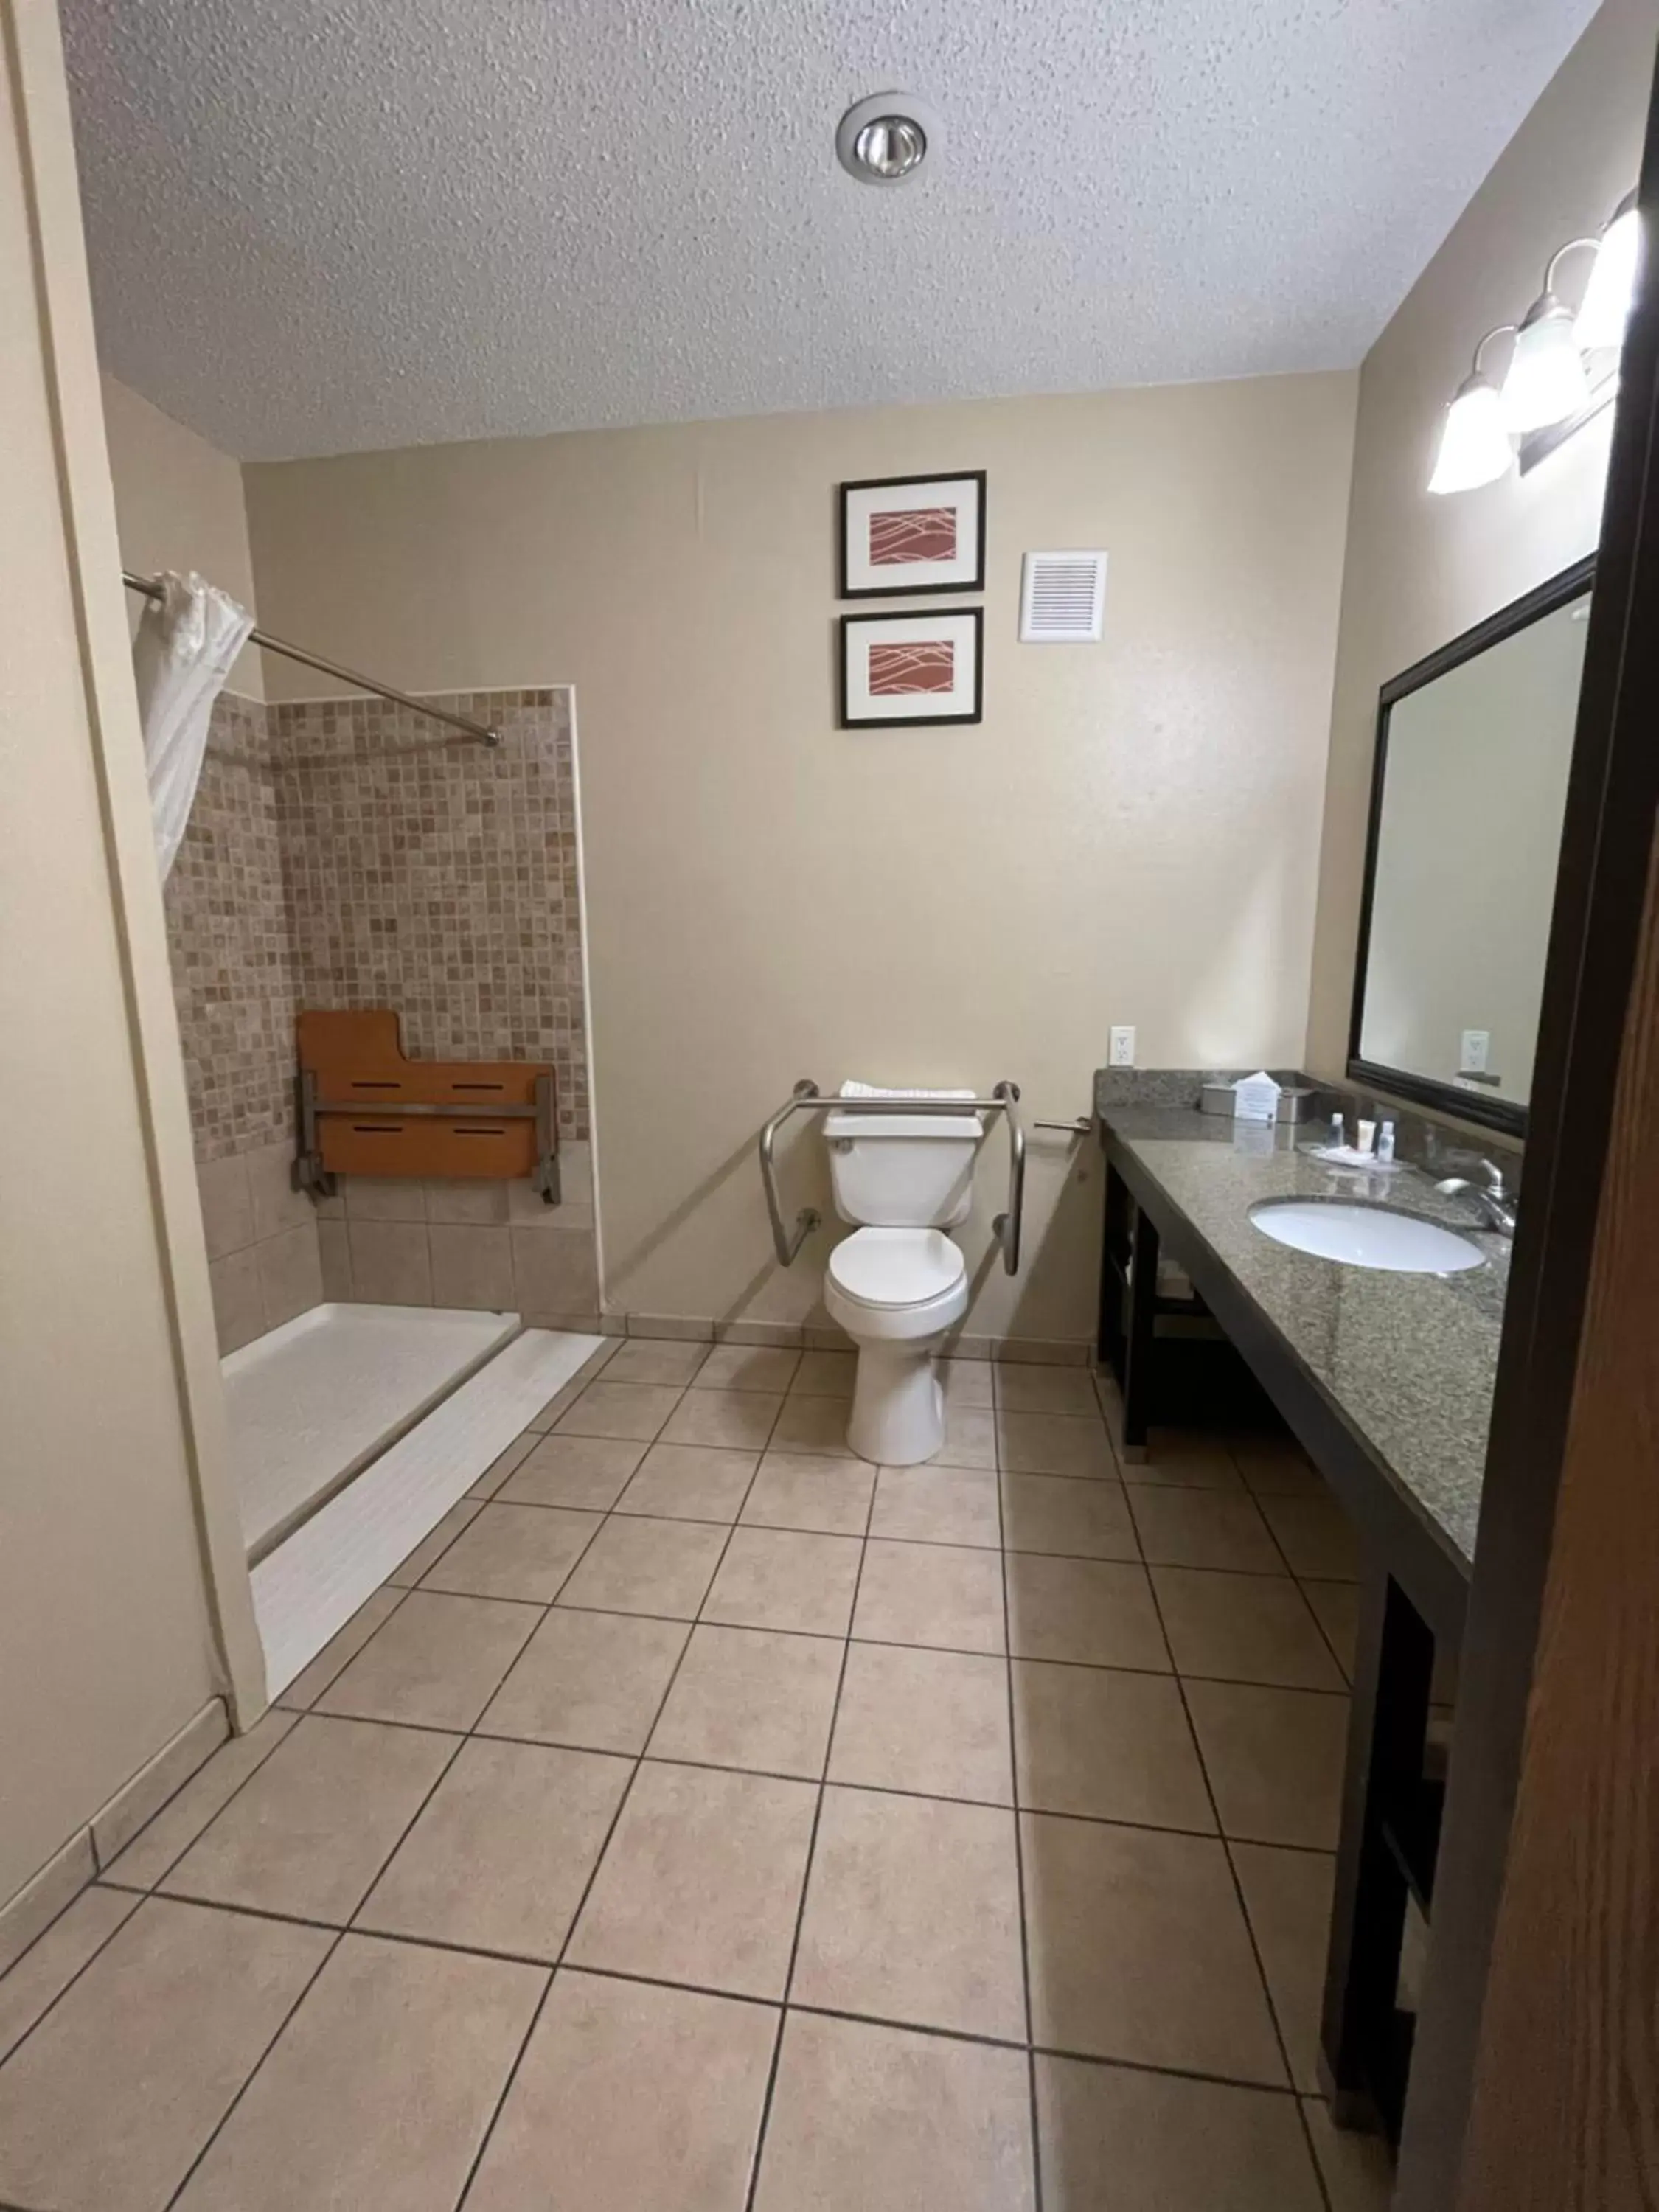 Bathroom in Comfort Suites Near Vancouver Mall